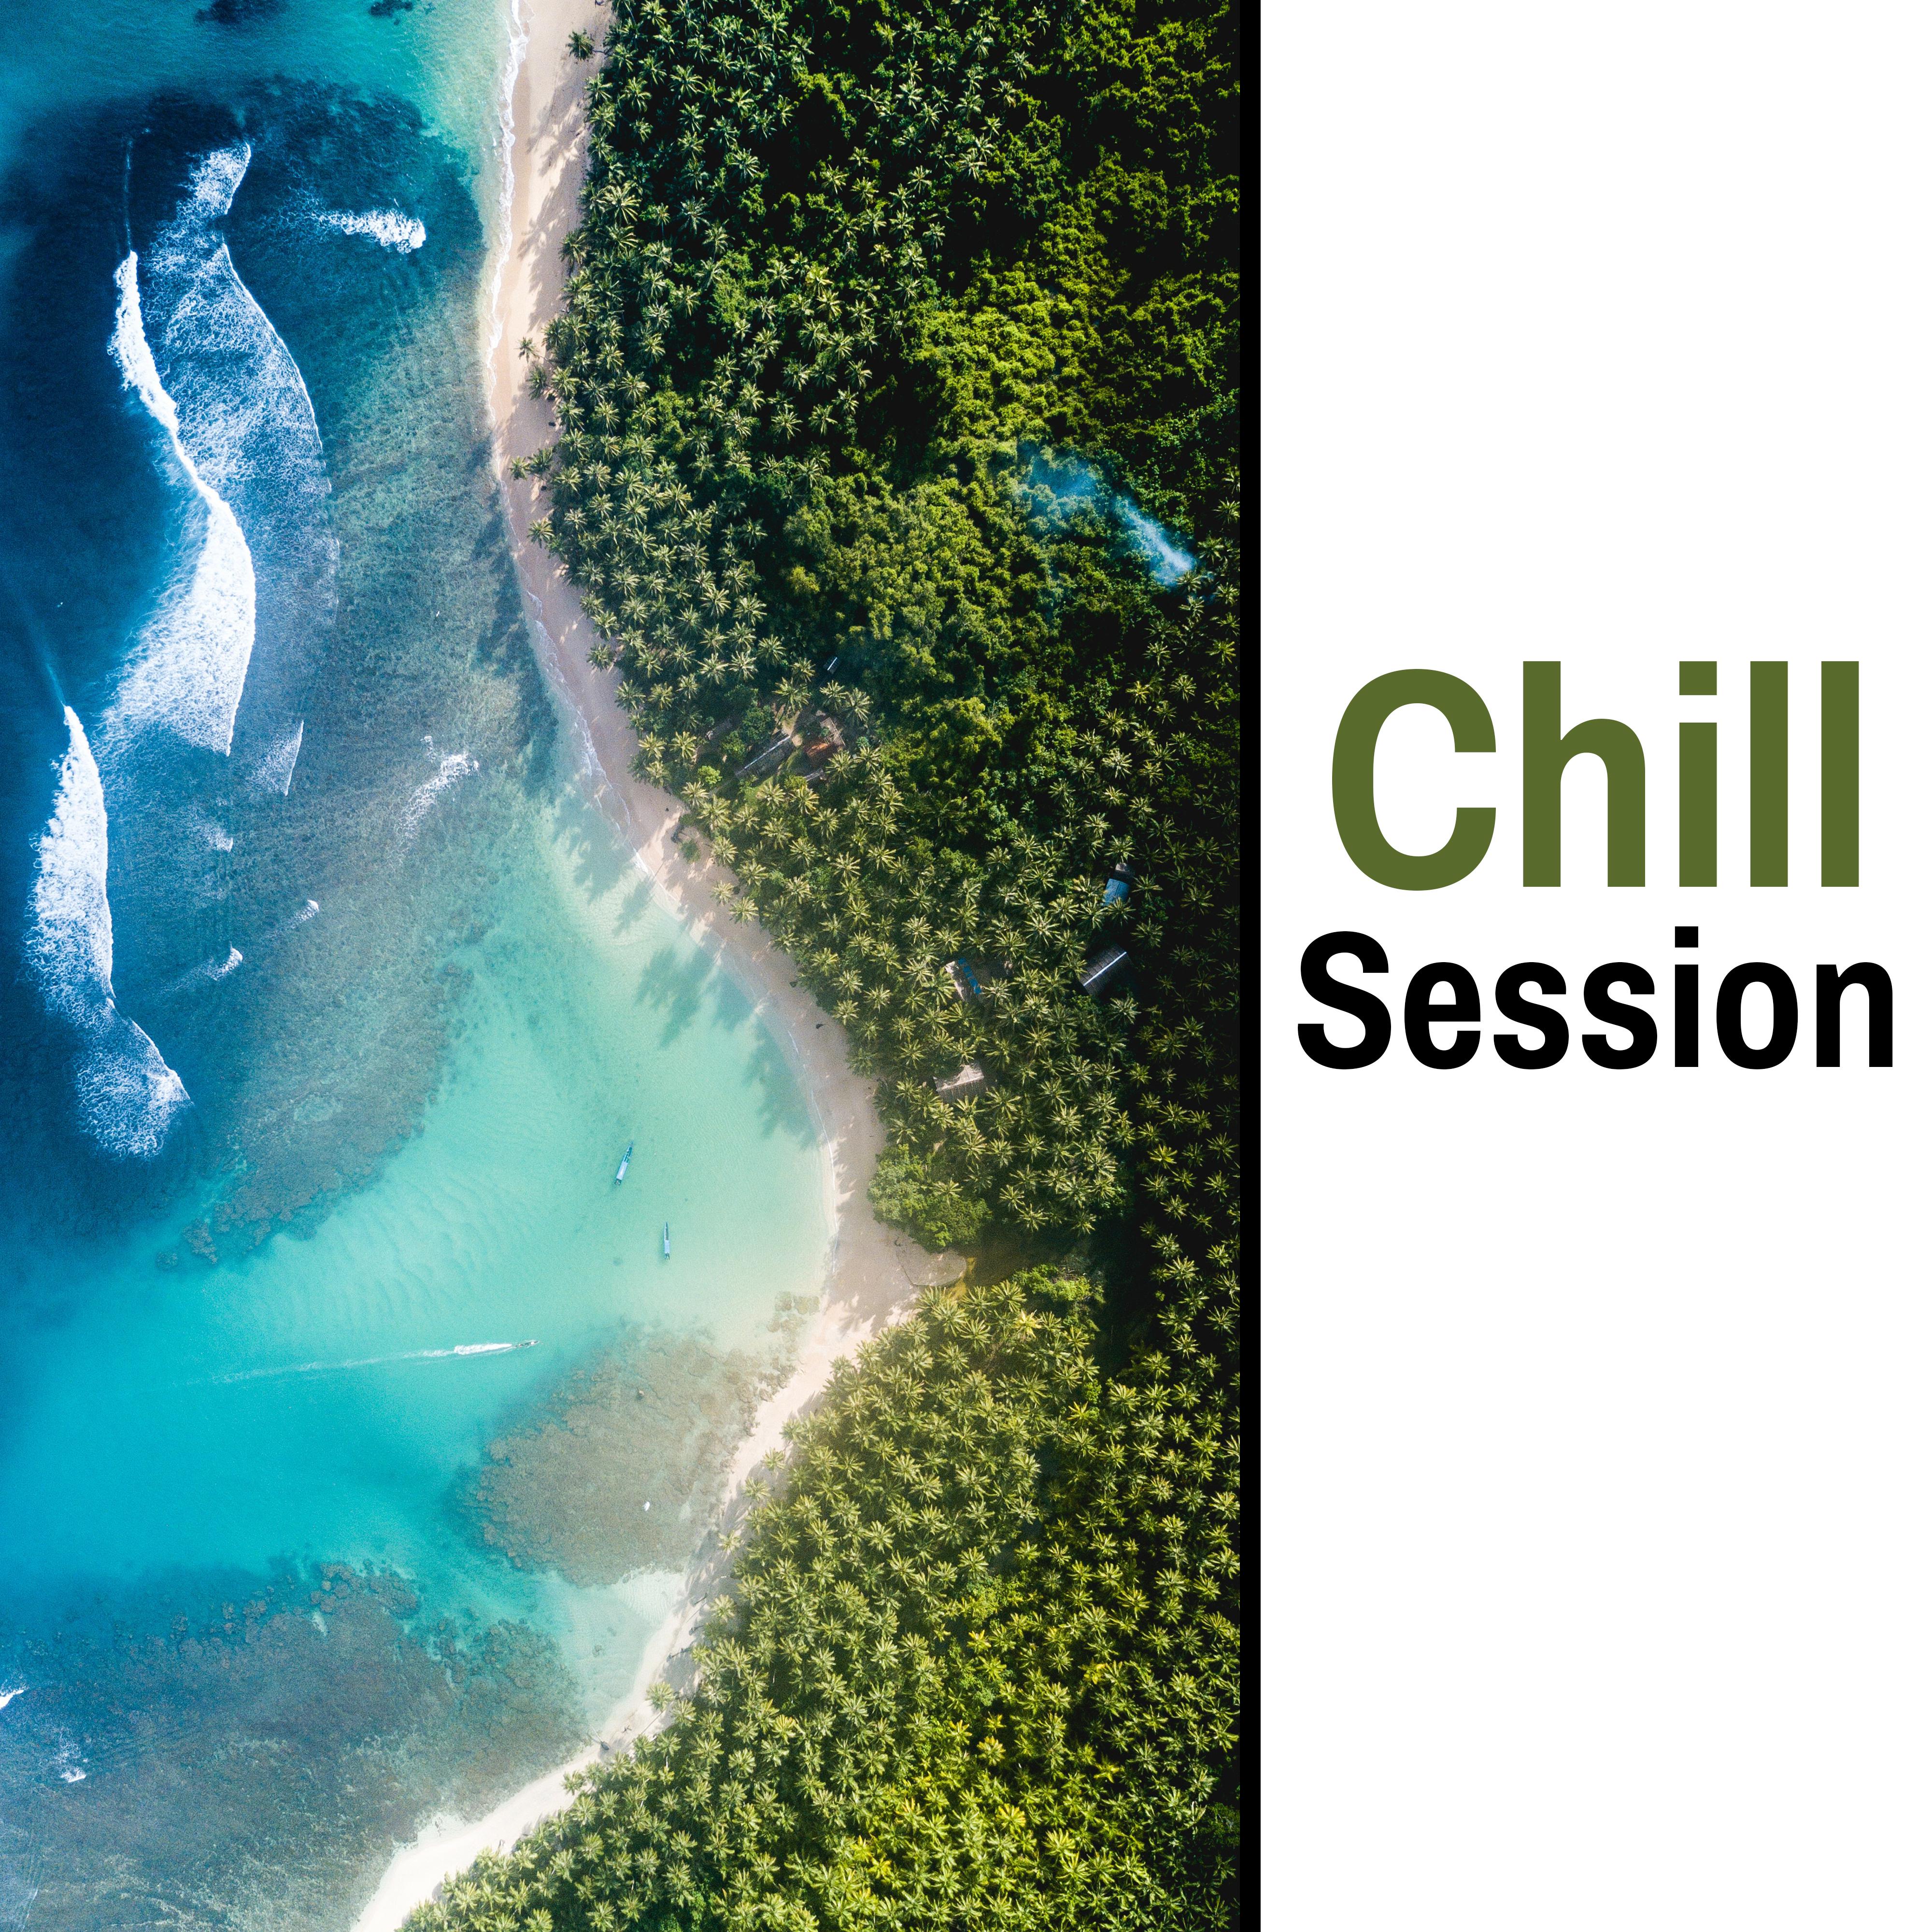 Chill Session  Soft Chill Out Music, Electronic Vibes, Soothing Sounds, Easy Listening, Beach Lounge